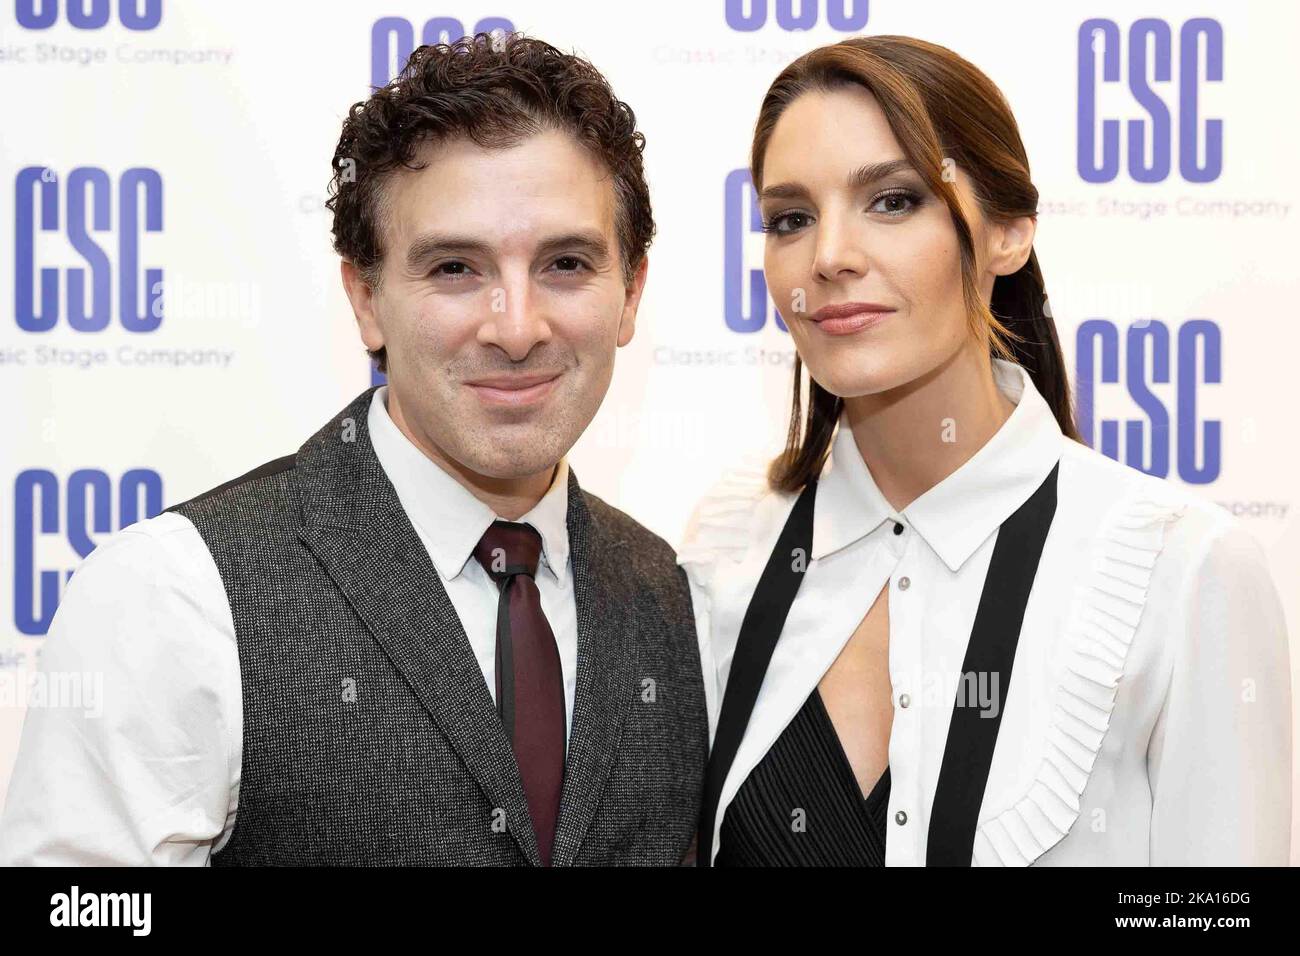 New York, NY, USA. 30th Oct, 2022. Jarrod Spector, Jasmine Cephas Jones in attendance for A MAN OF NO IMPORTANCE Opening Night on Broadway, Classic Stage Company, New York, NY October 30, 2022. Credit: Manoli Figetakis/Everett Collection/Alamy Live News Stock Photo